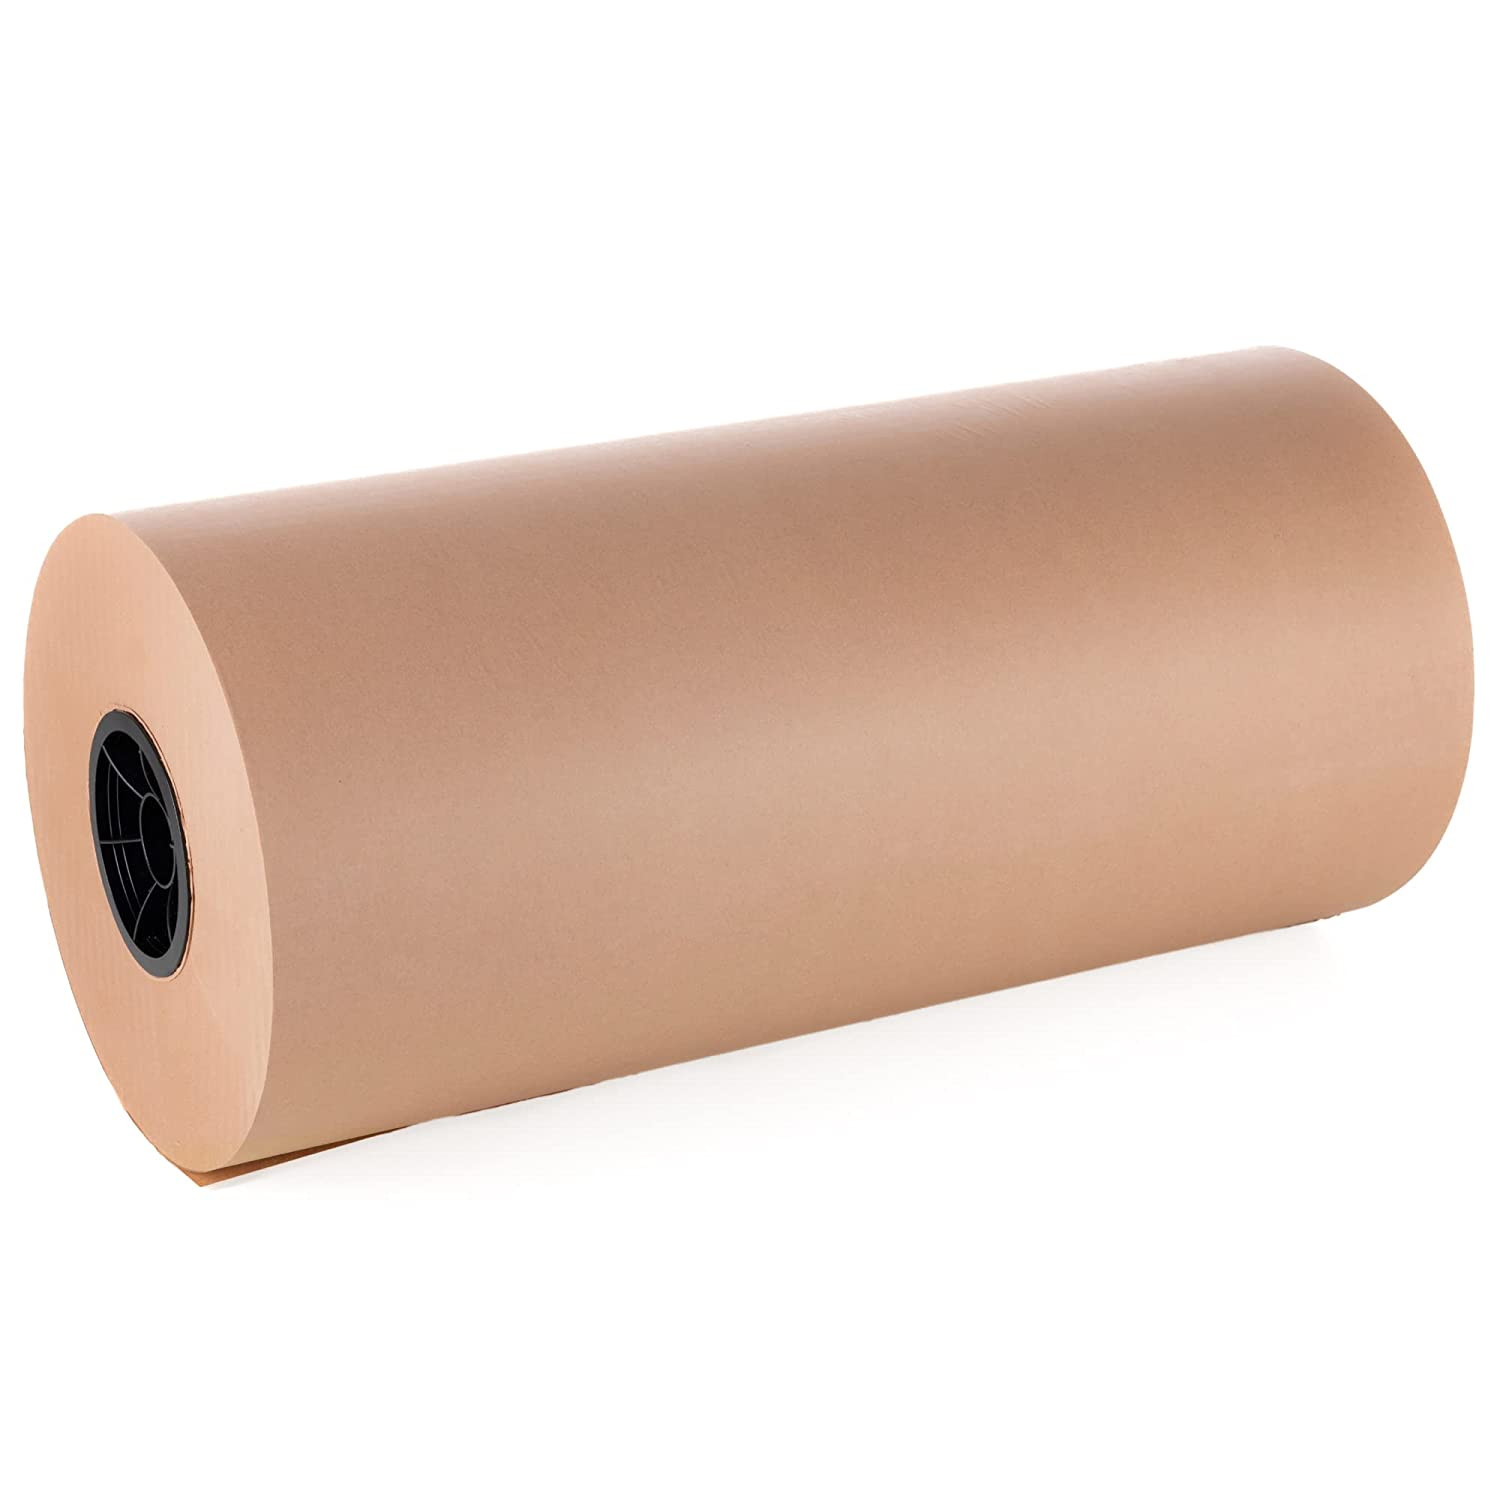 PD-RD18 Kraft Paper Roll Dispenser & Cutter for Rolls up to 18 Wide and 9  in Diameter buy in stock in U.S. in IDL Packaging